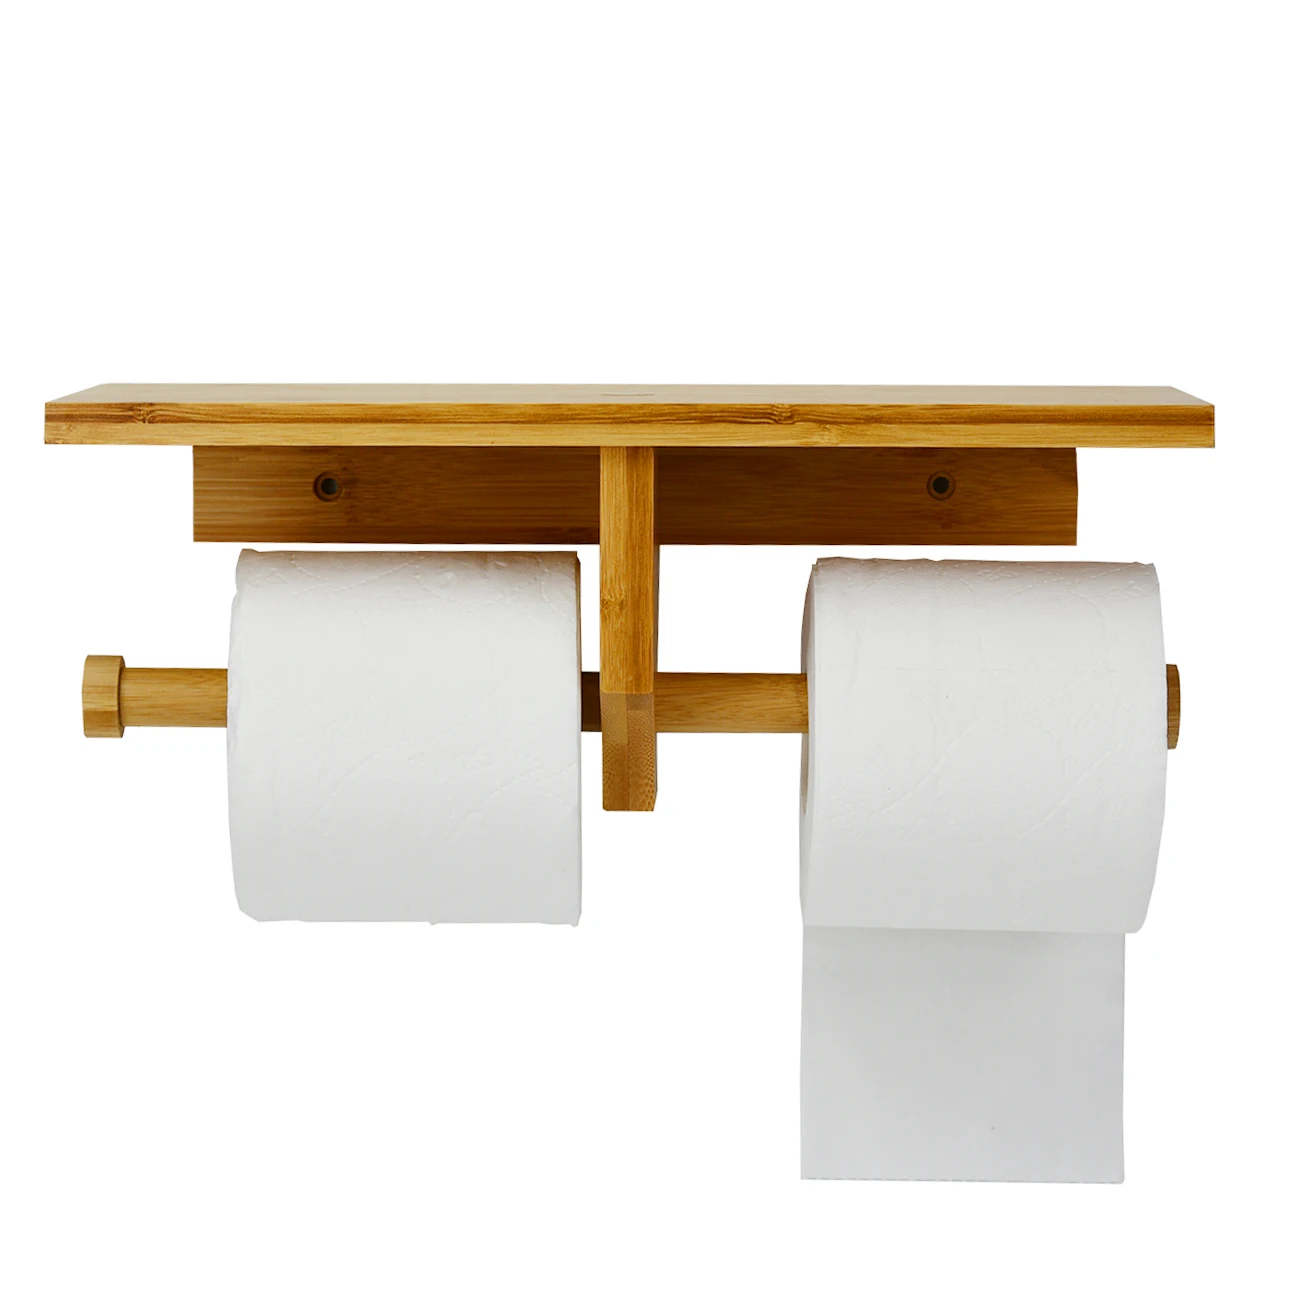 Wholesale Customized Bamboo Wood  Bathroom Toilet Paper Wall Double Column Kitchen Tissue Role Holder Gold